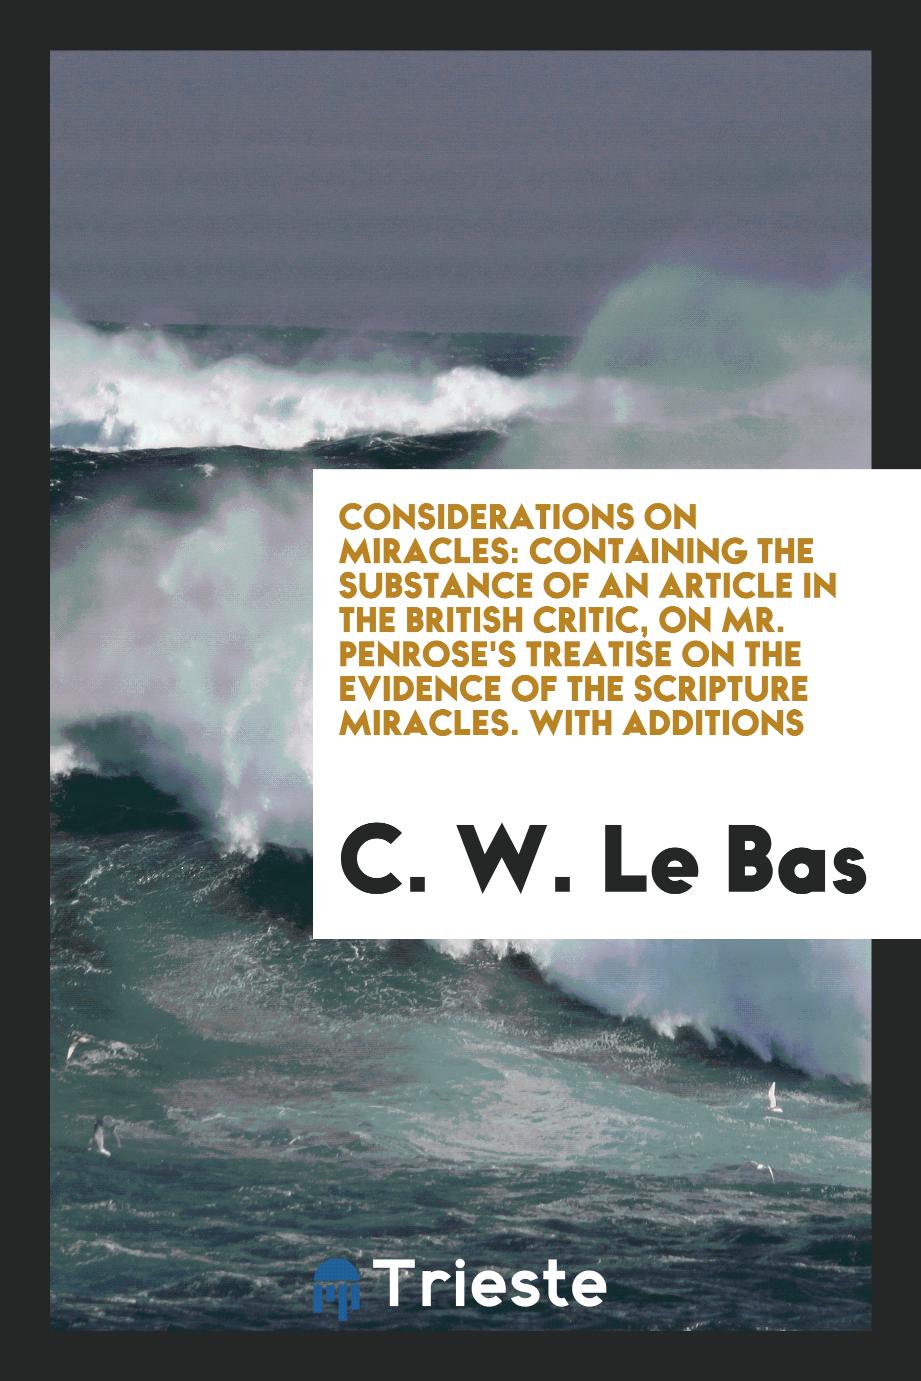 Considerations on Miracles: Containing the Substance of an Article in the British Critic, on Mr. Penrose's Treatise on the Evidence of the Scripture Miracles. With Additions